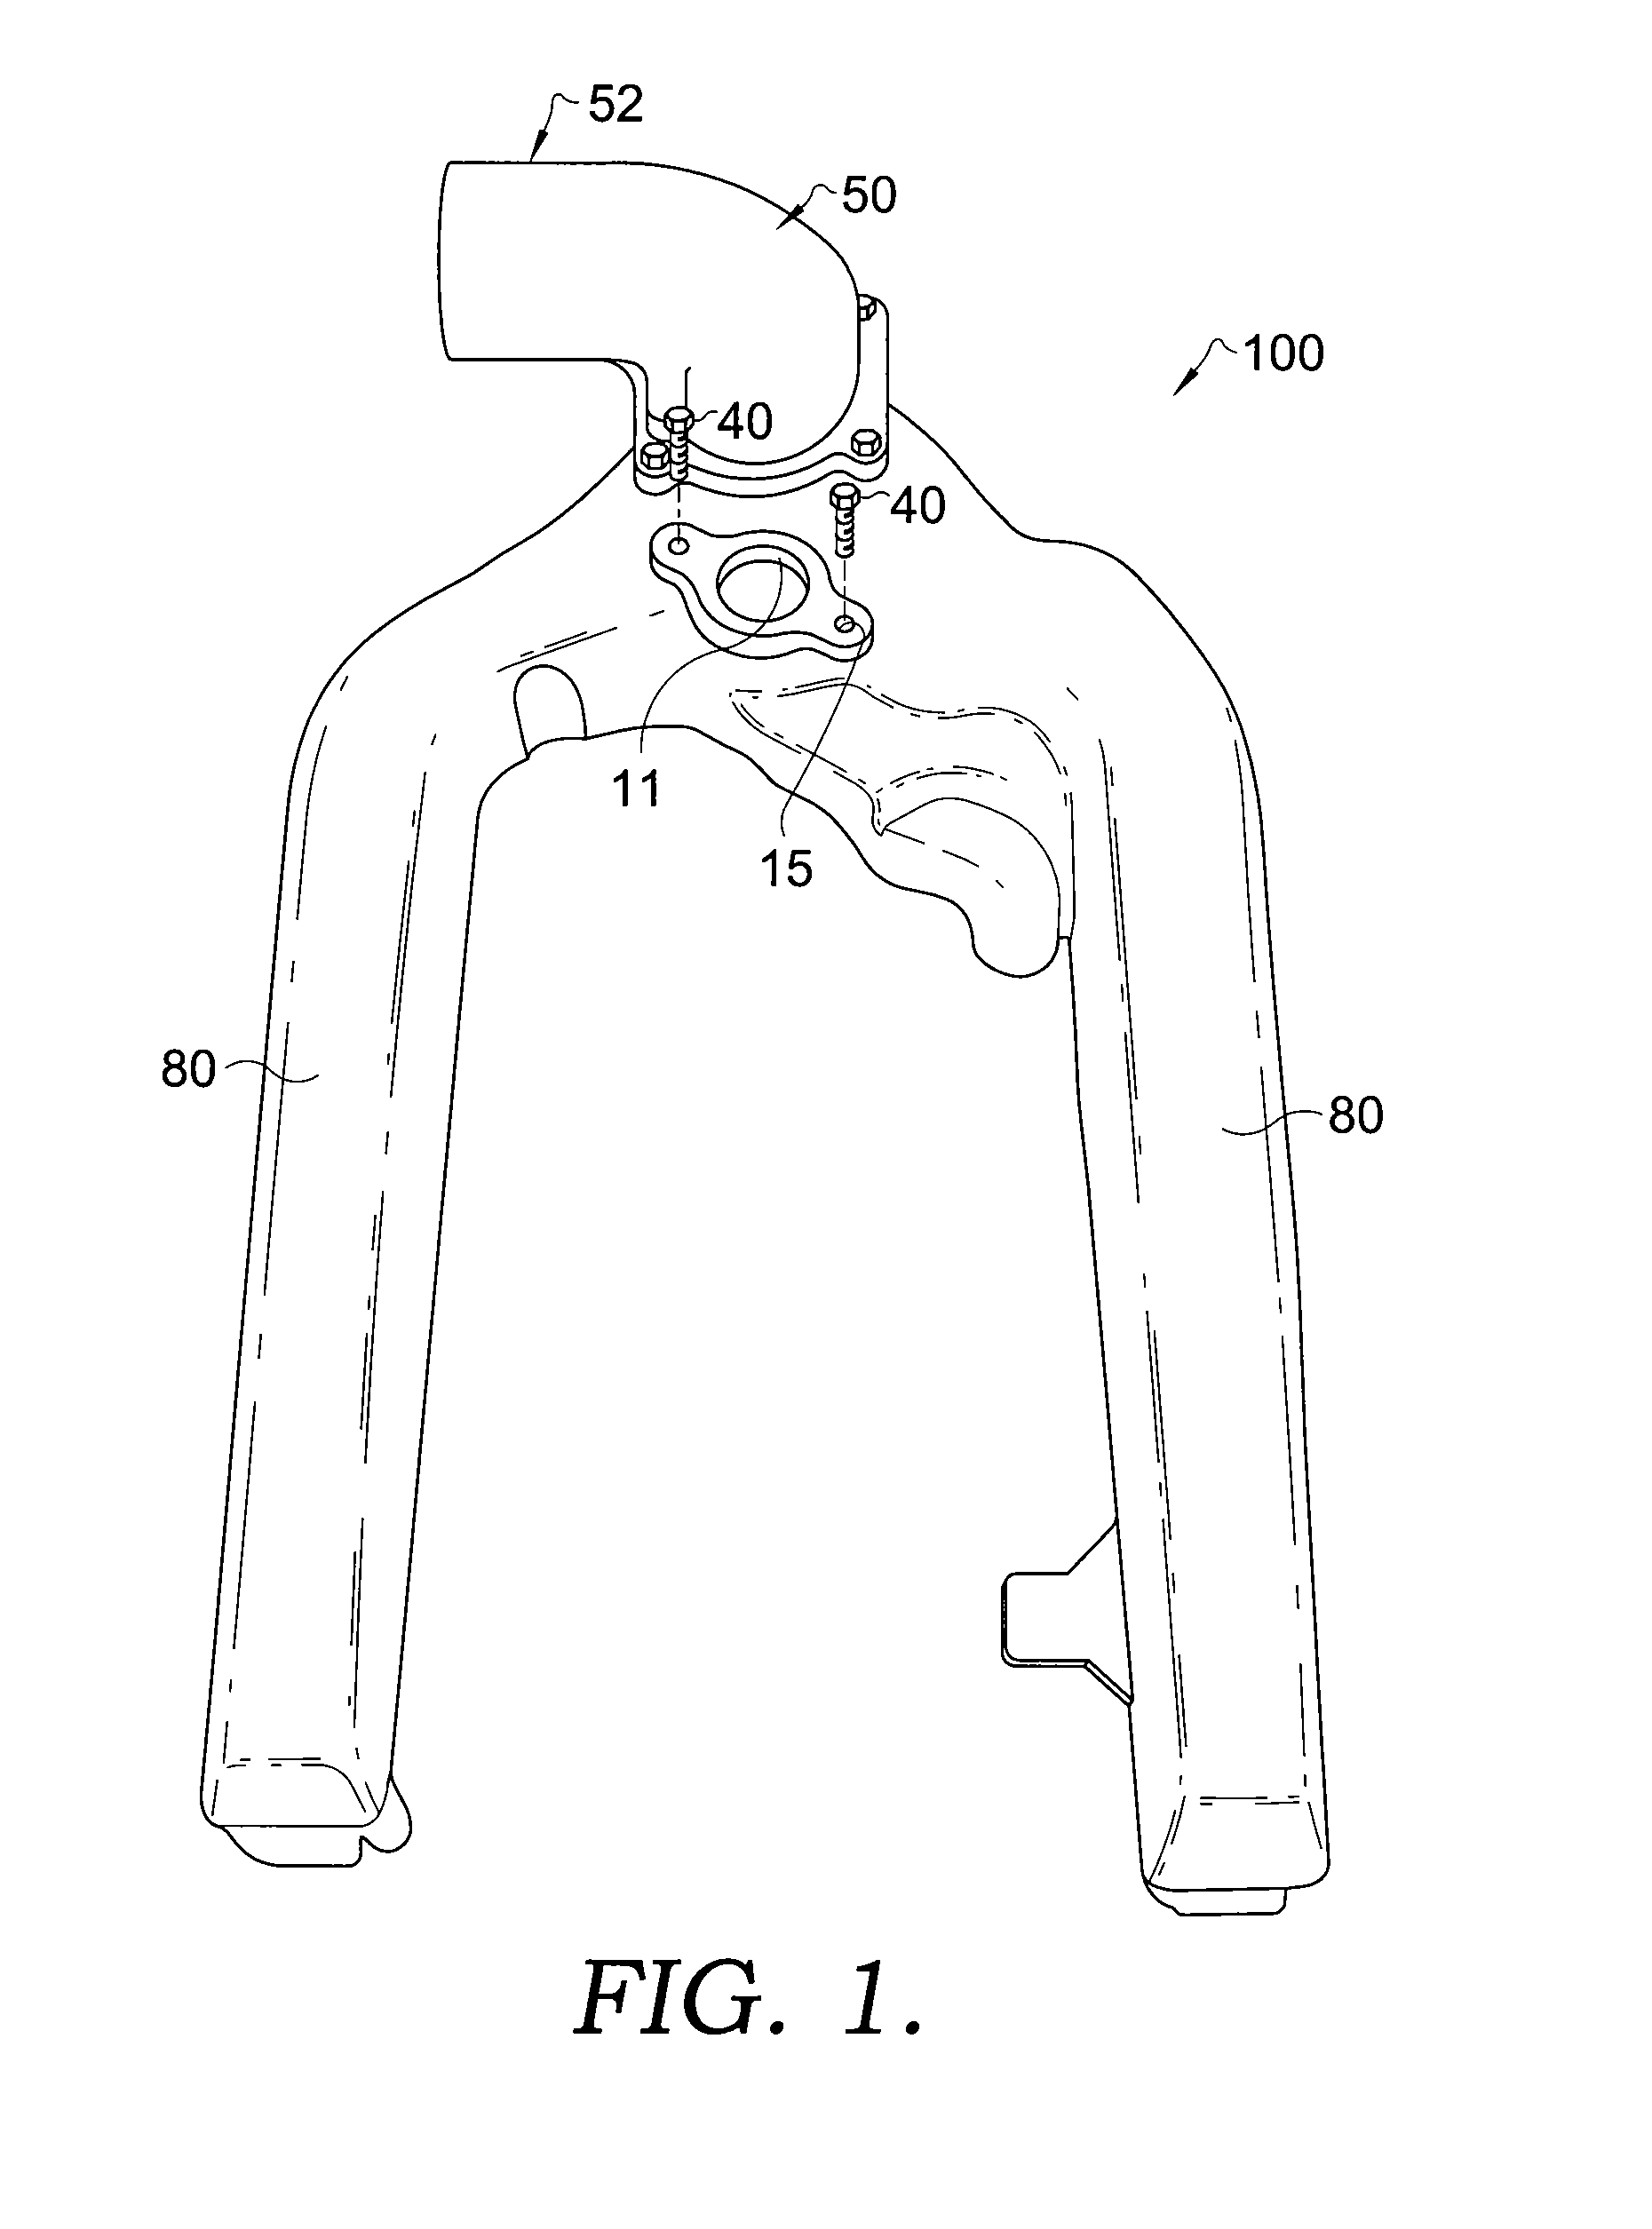 Method and device for cleaning the air intake system of a diesel vehicle